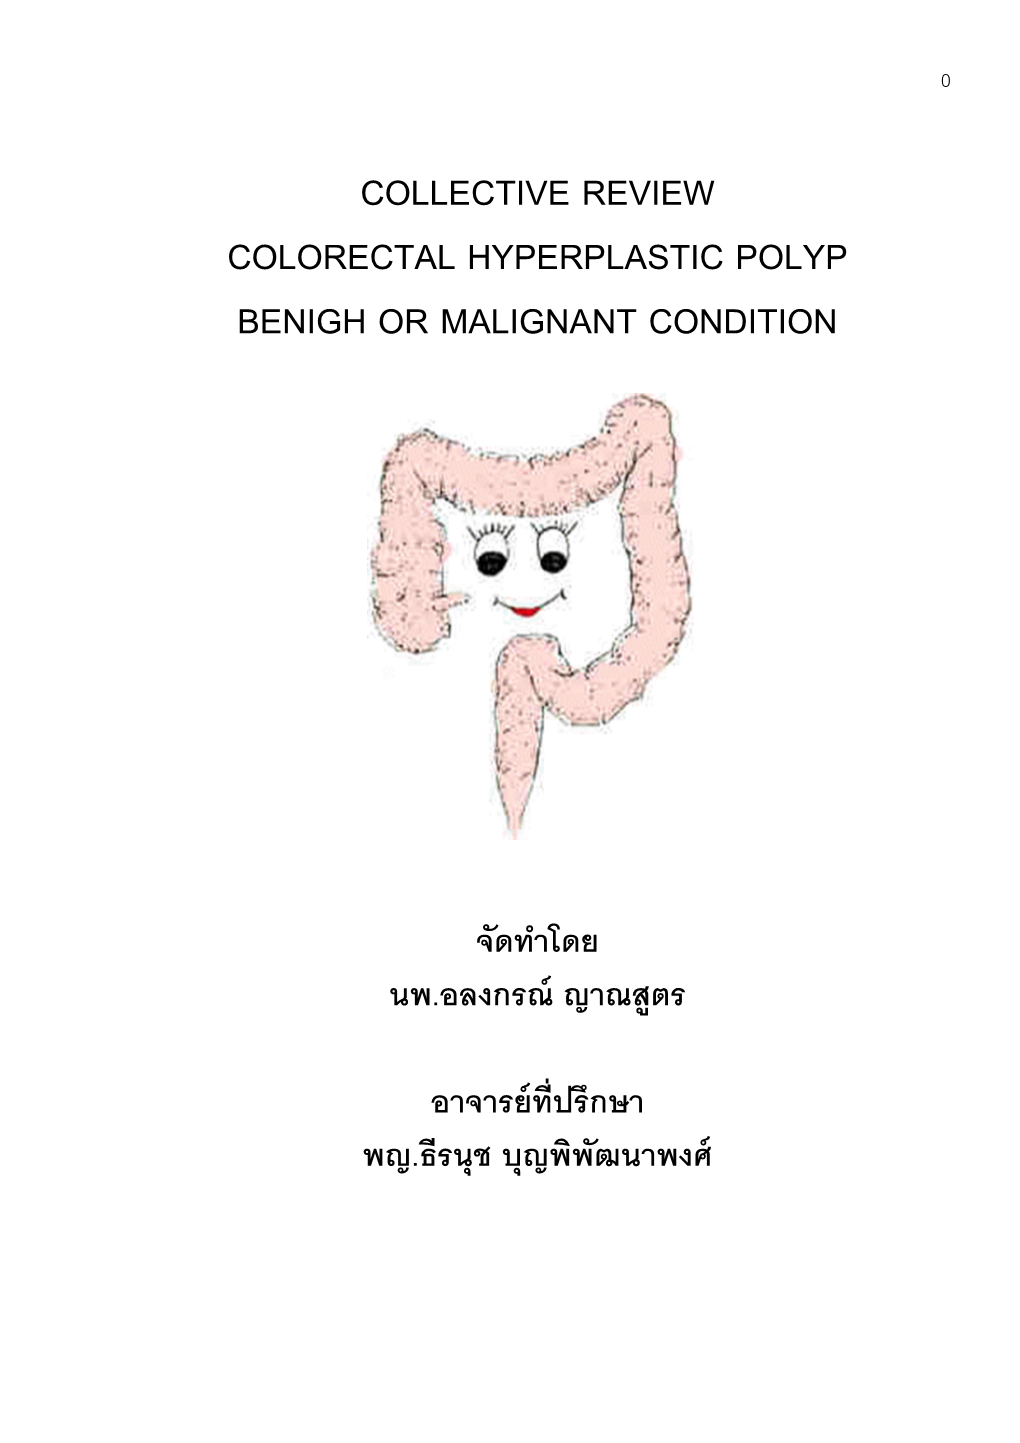 Collective Rev Colorectal Benigh Or Malignant Collective Review Colorectal Hyperplastic Polyp Benigh Or Malignant Condition Yper